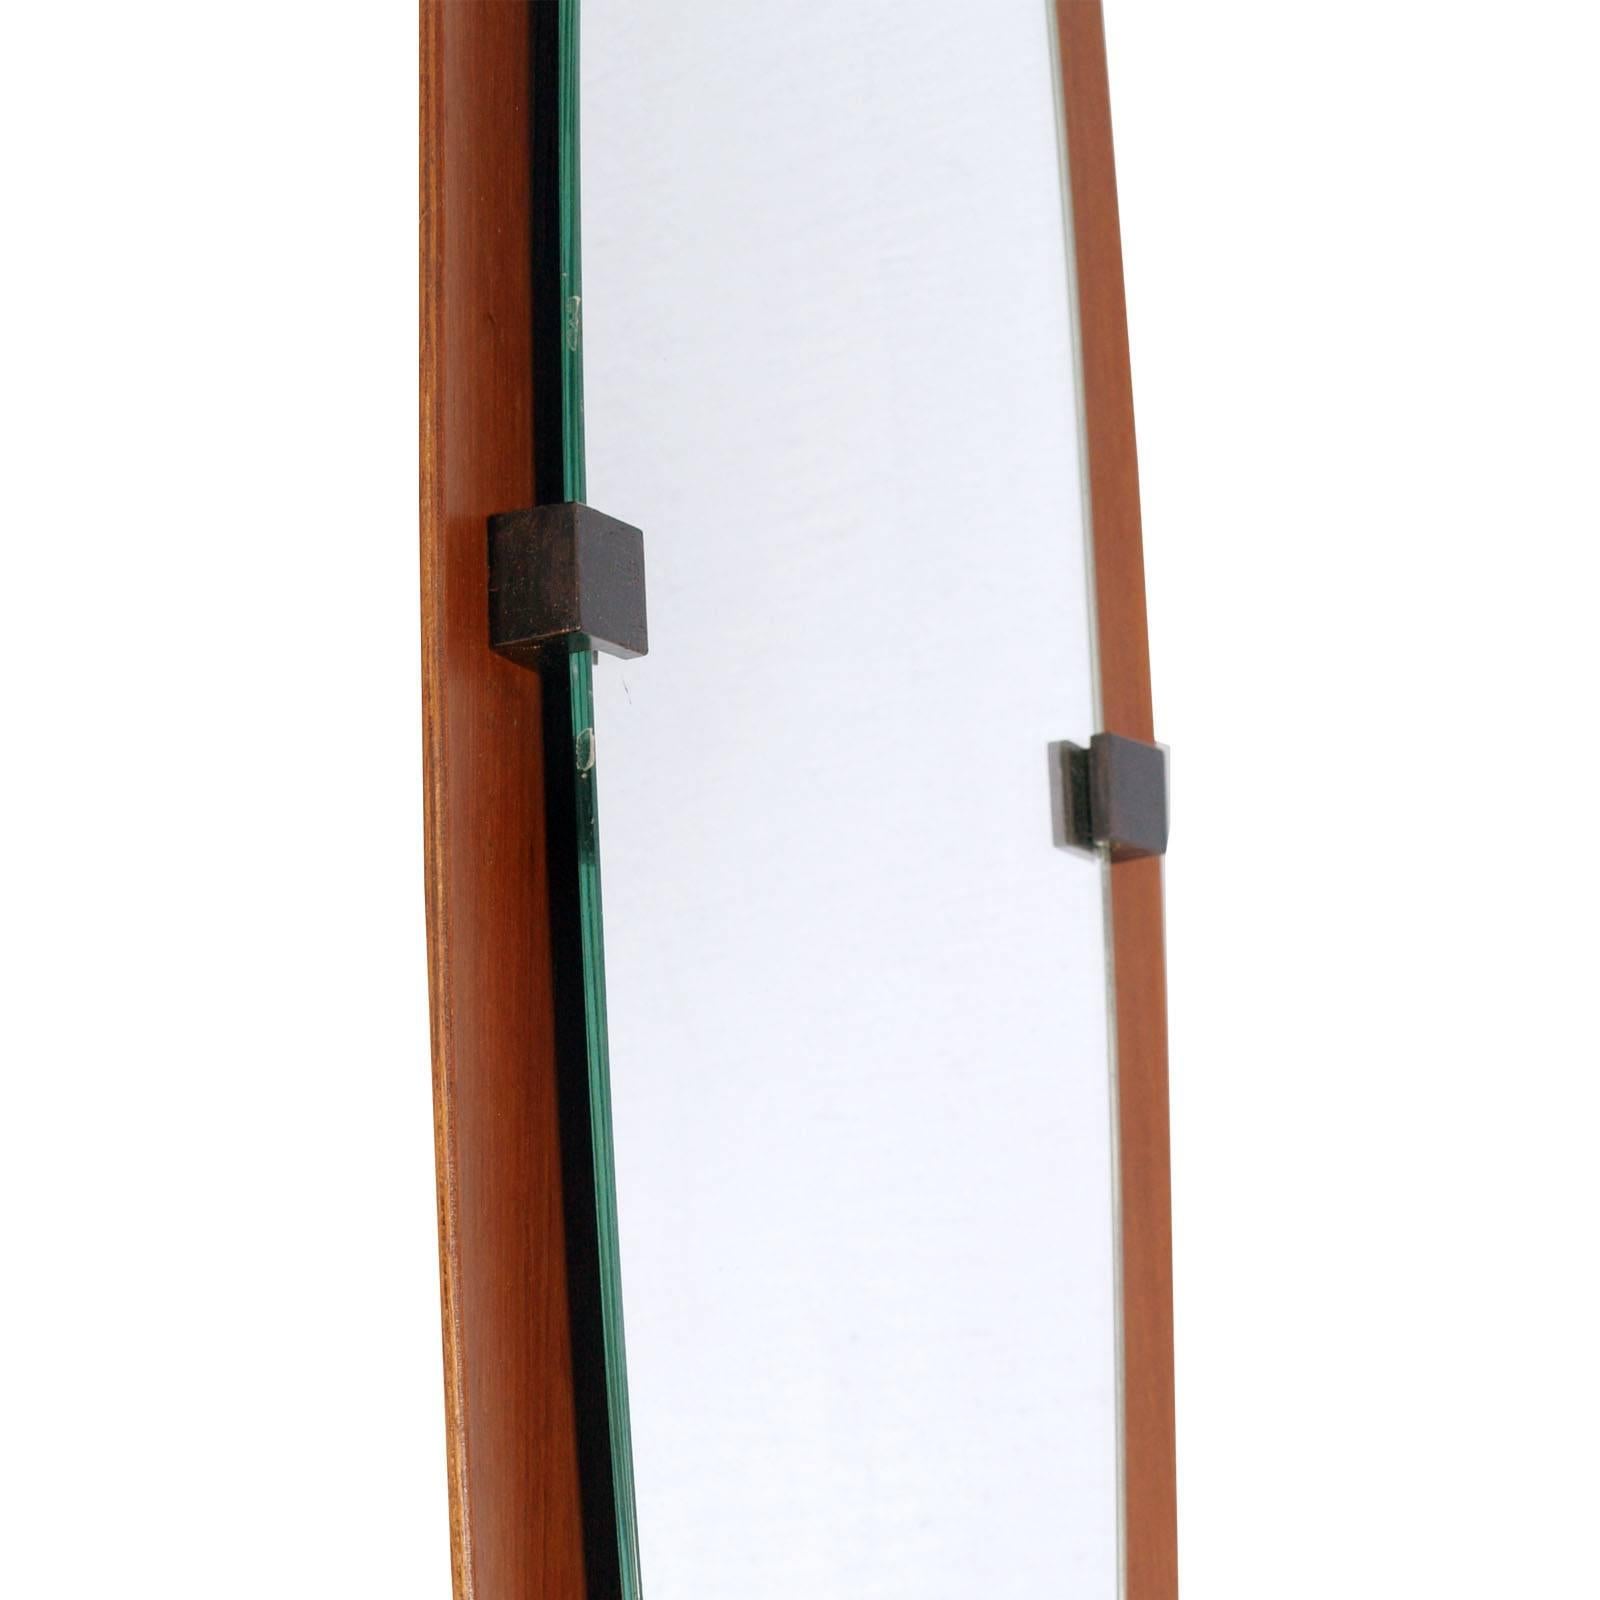 Italy oval mirror period, 1960s, by Franco Campo and Carlo Graffi for Home. Frame in bent plywood .
Measures cm: H 130 W 30 D 5 (mirror 98x23)

About Franco Campo and Carlo Graffi 
Franco Campo and Carlo Graffi, fellow university architects,